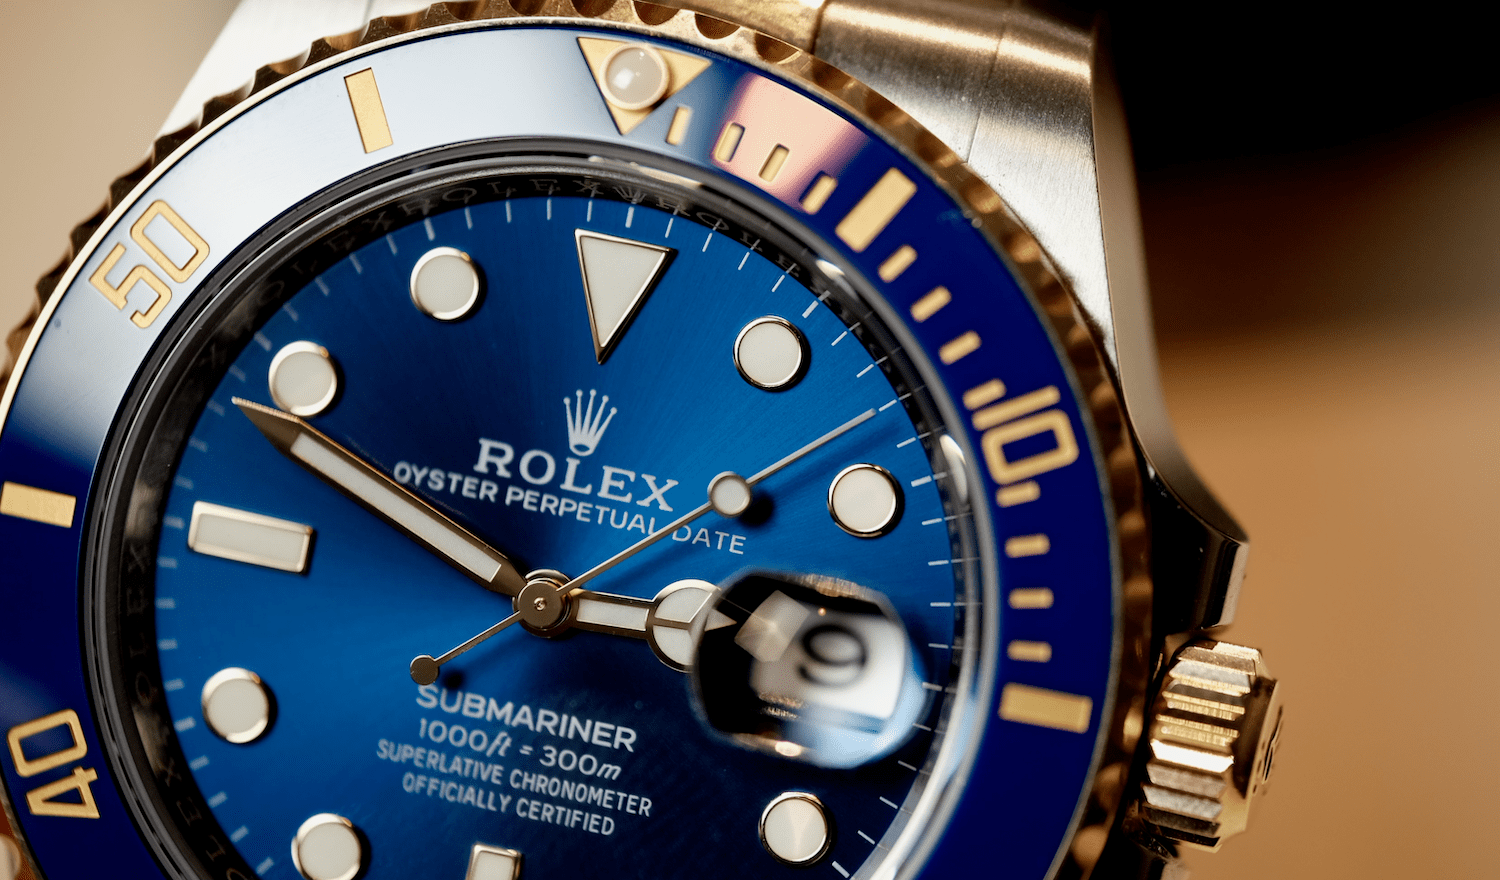 Rolex Submariner Date Bluesy Dial Movement